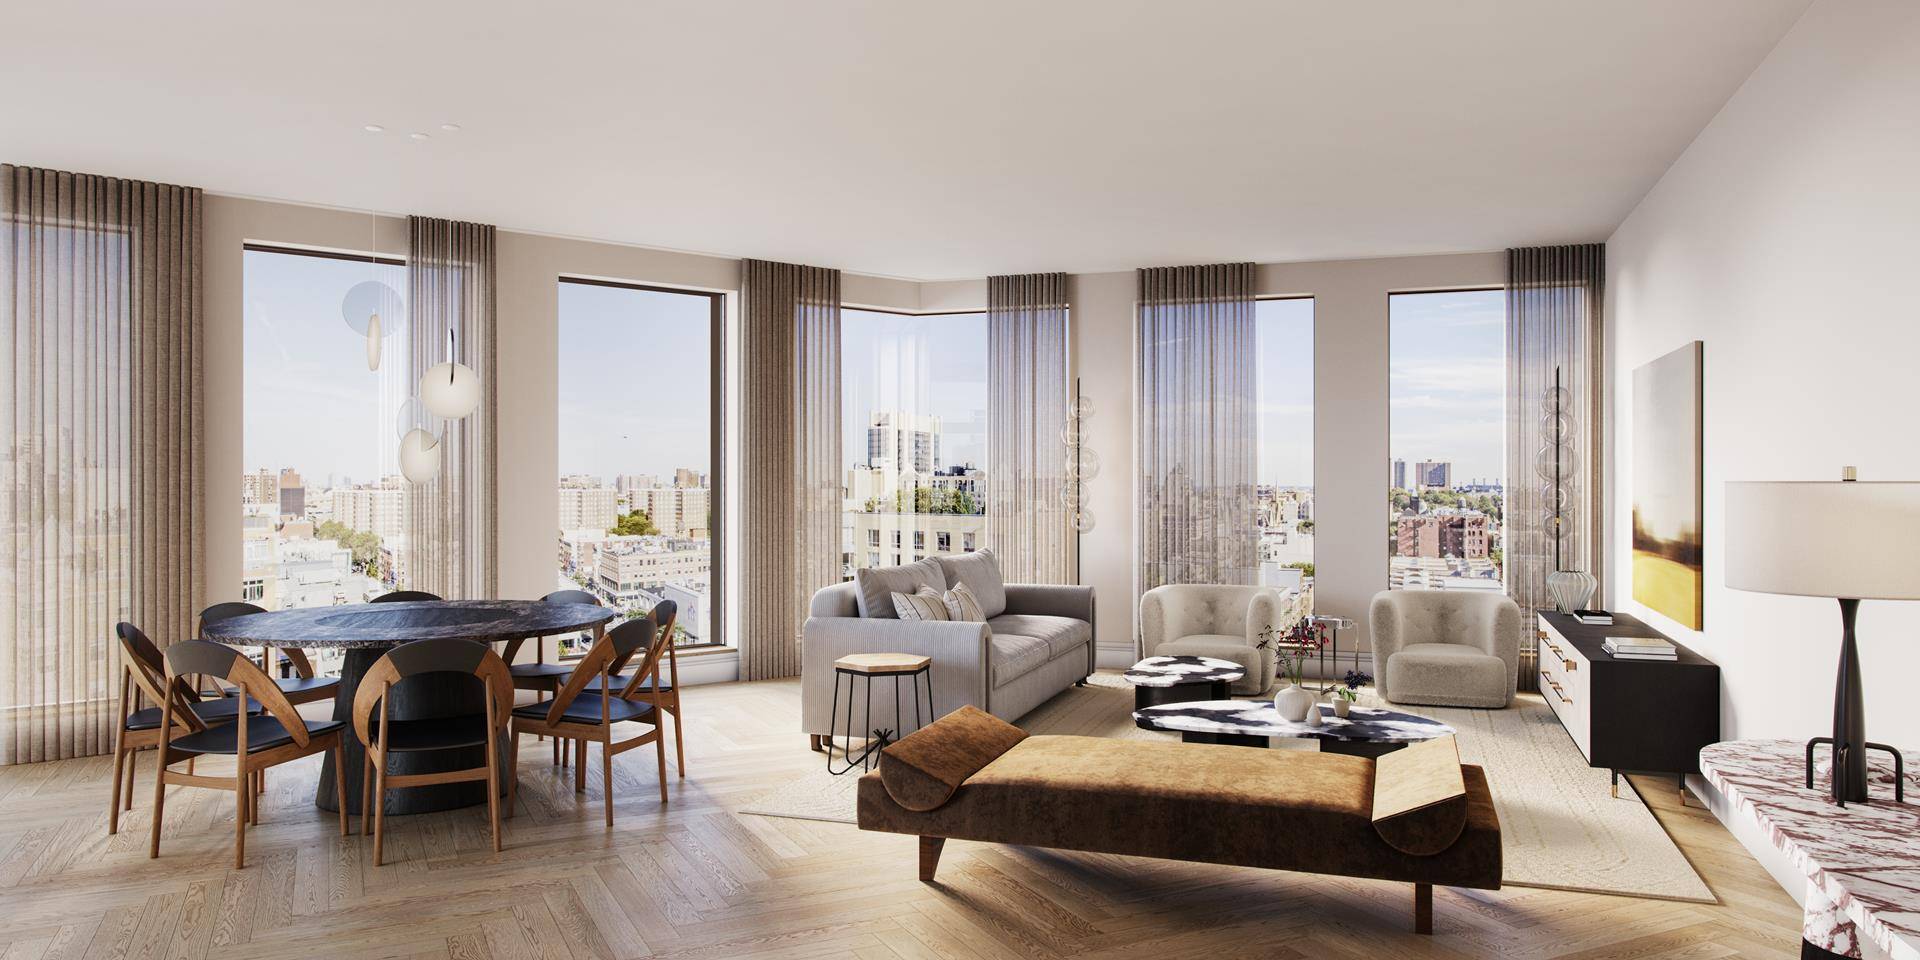 Sales Gallery Now Open By Appointment Introducing residence 3G at 300 West, a 1, 000 square foot eastern facing two bedroom, two bathroom, offering an enormous living and dining area ...